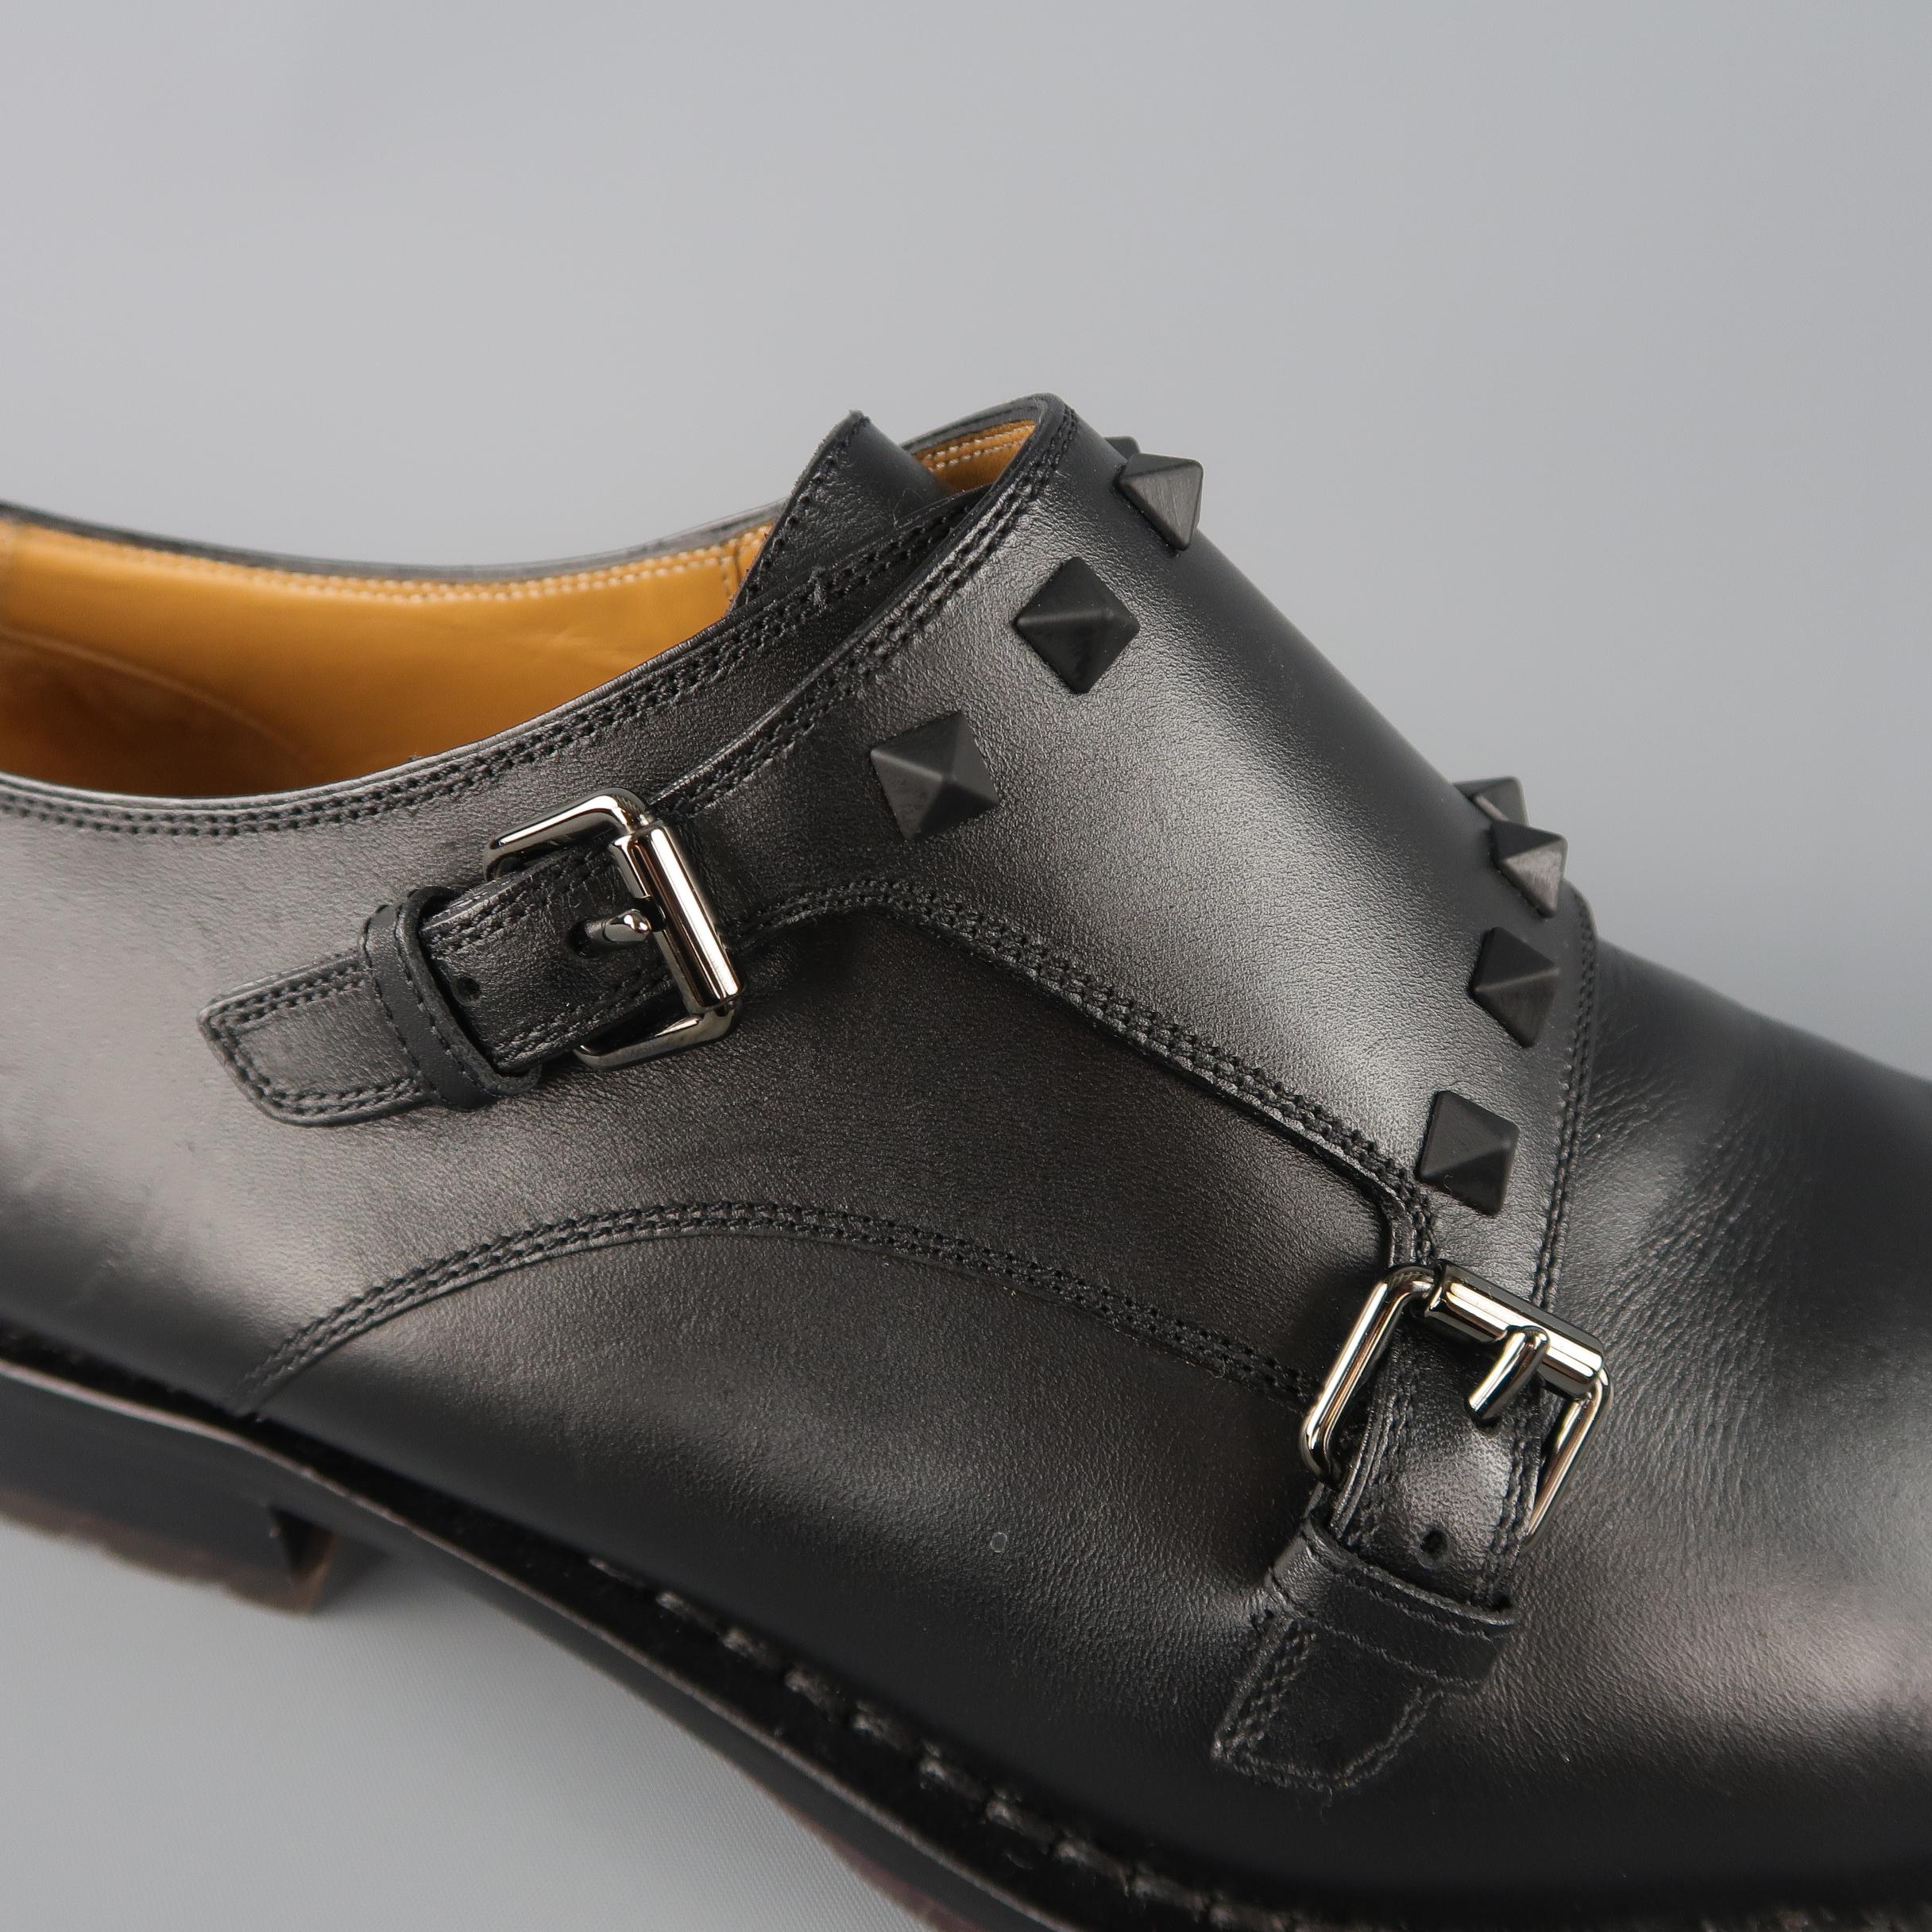 VALENTINO dress shoes come in smooth black leather with a double monk strap, black rubberized Rock Studs, and commando style sole. Worn once back stud damaged. As-is. Made in Italy.
 
Good Pre-Owned Condition.
Marked: IT 44
 
Outsole: 12.25 x 4.5 in.